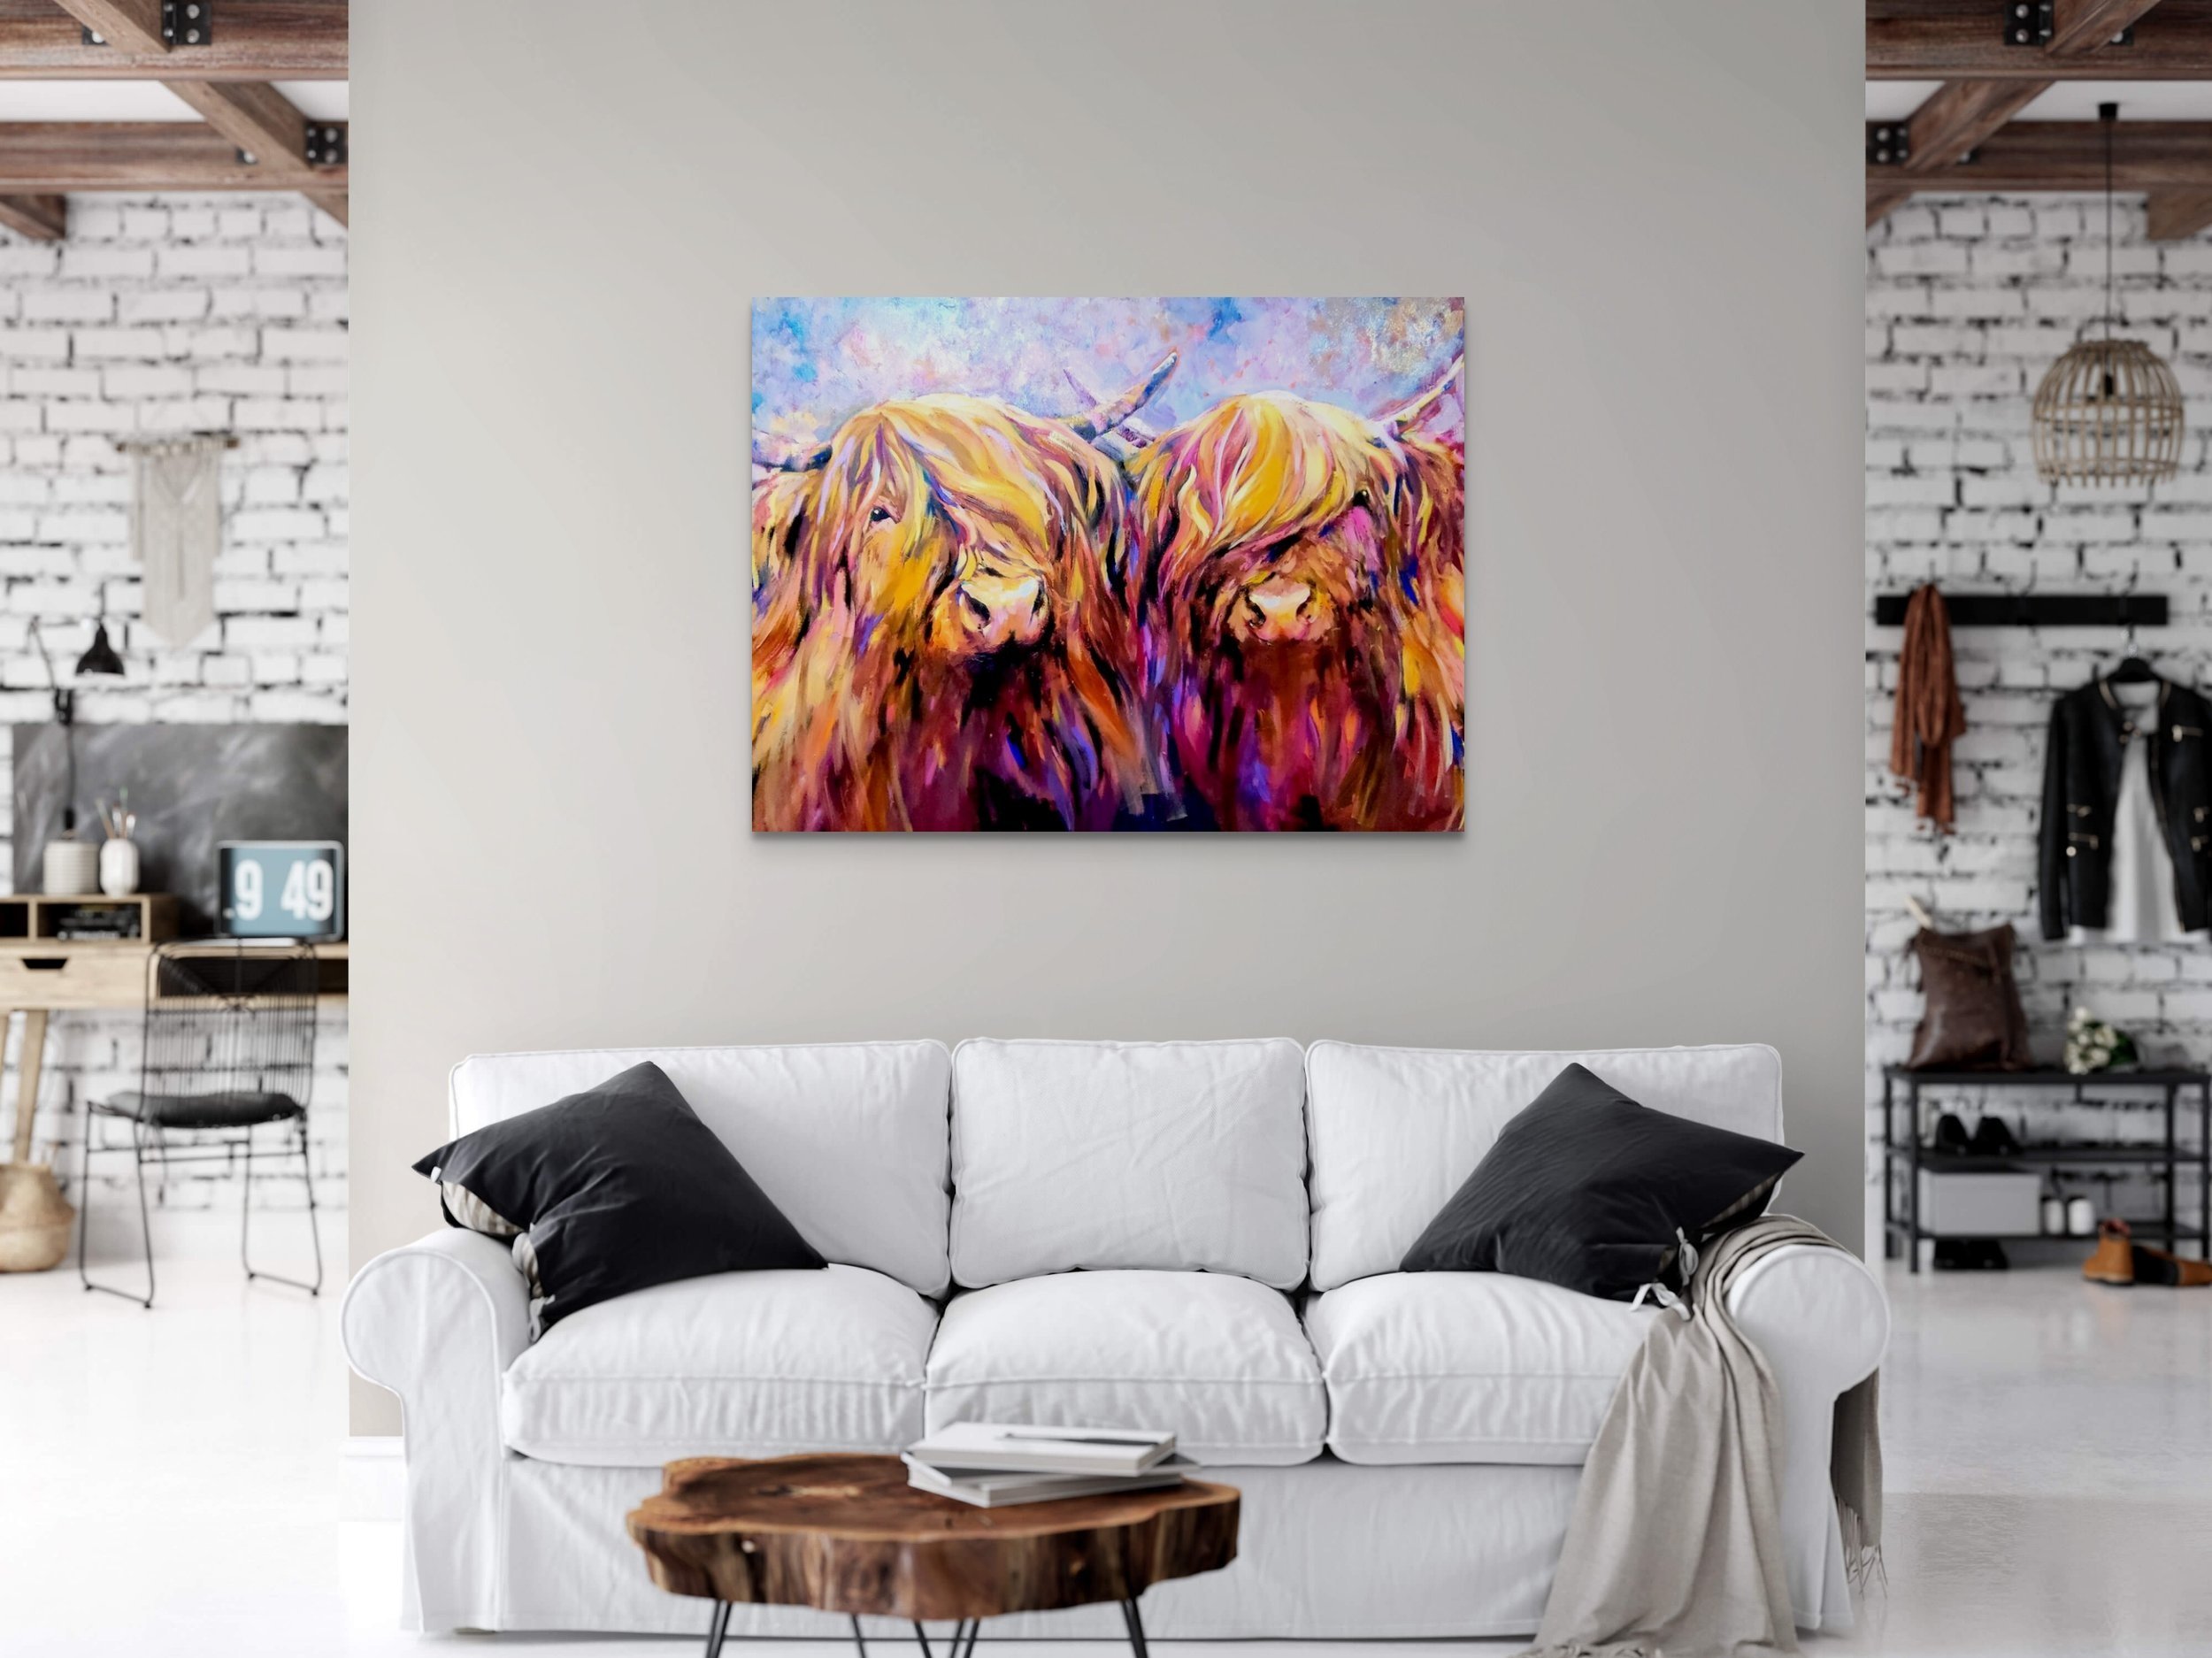 Two highland cows painting on the easel